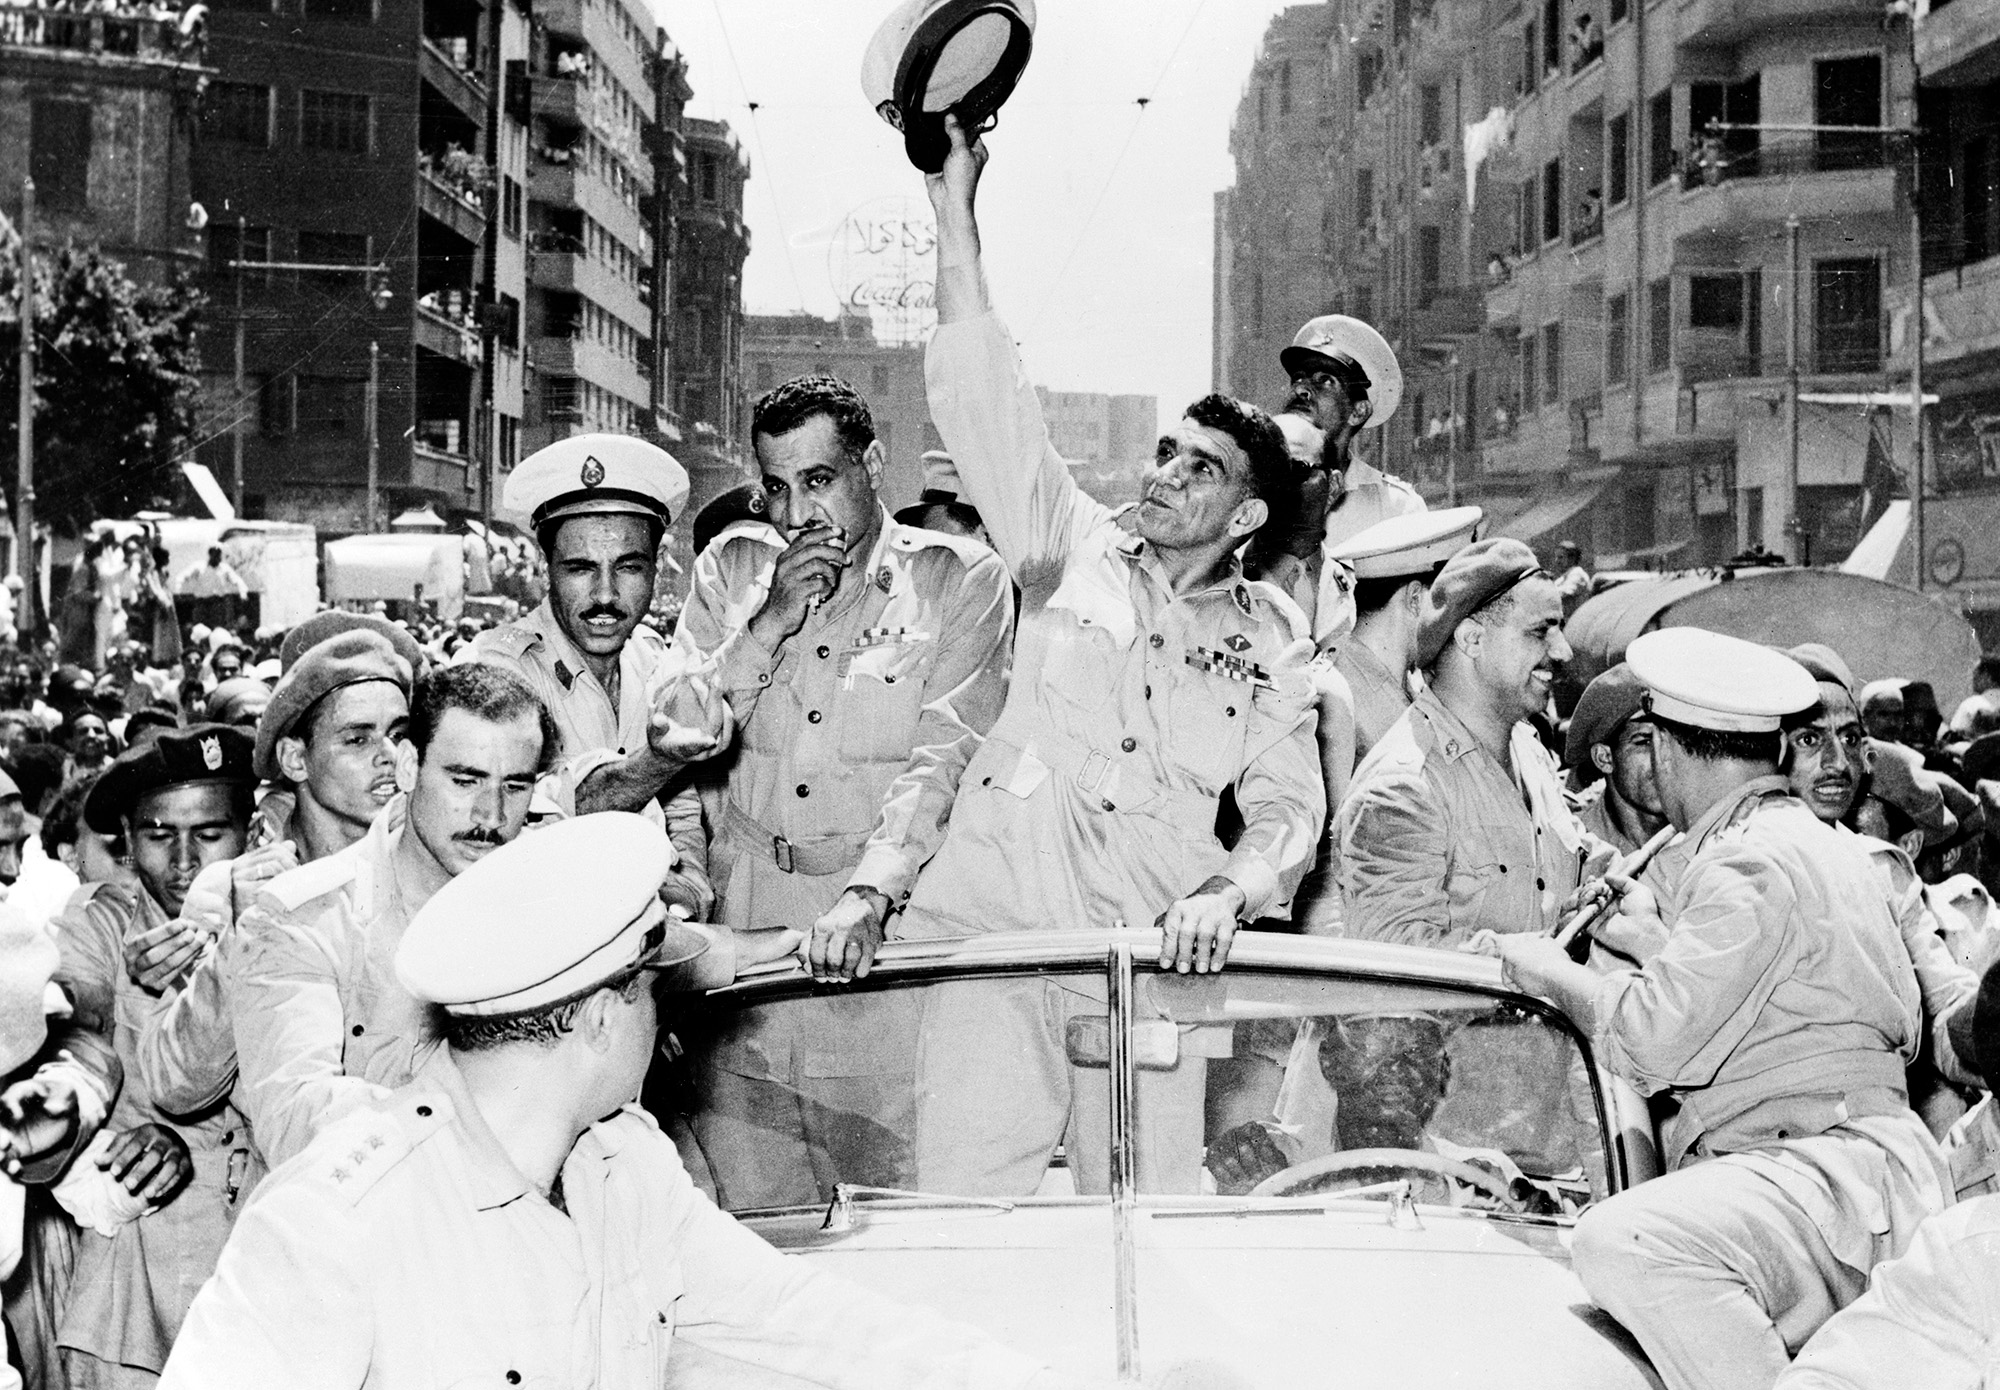 
General Mohammed Naguib, center, and Gamal Abdel Nasser, left, ride through Cairo in a cavalcade celebrating Egypt&#8217;s change from a monarchy to a republic on June 20, 1953. Keystone/Hulton Archive/Getty Images.






